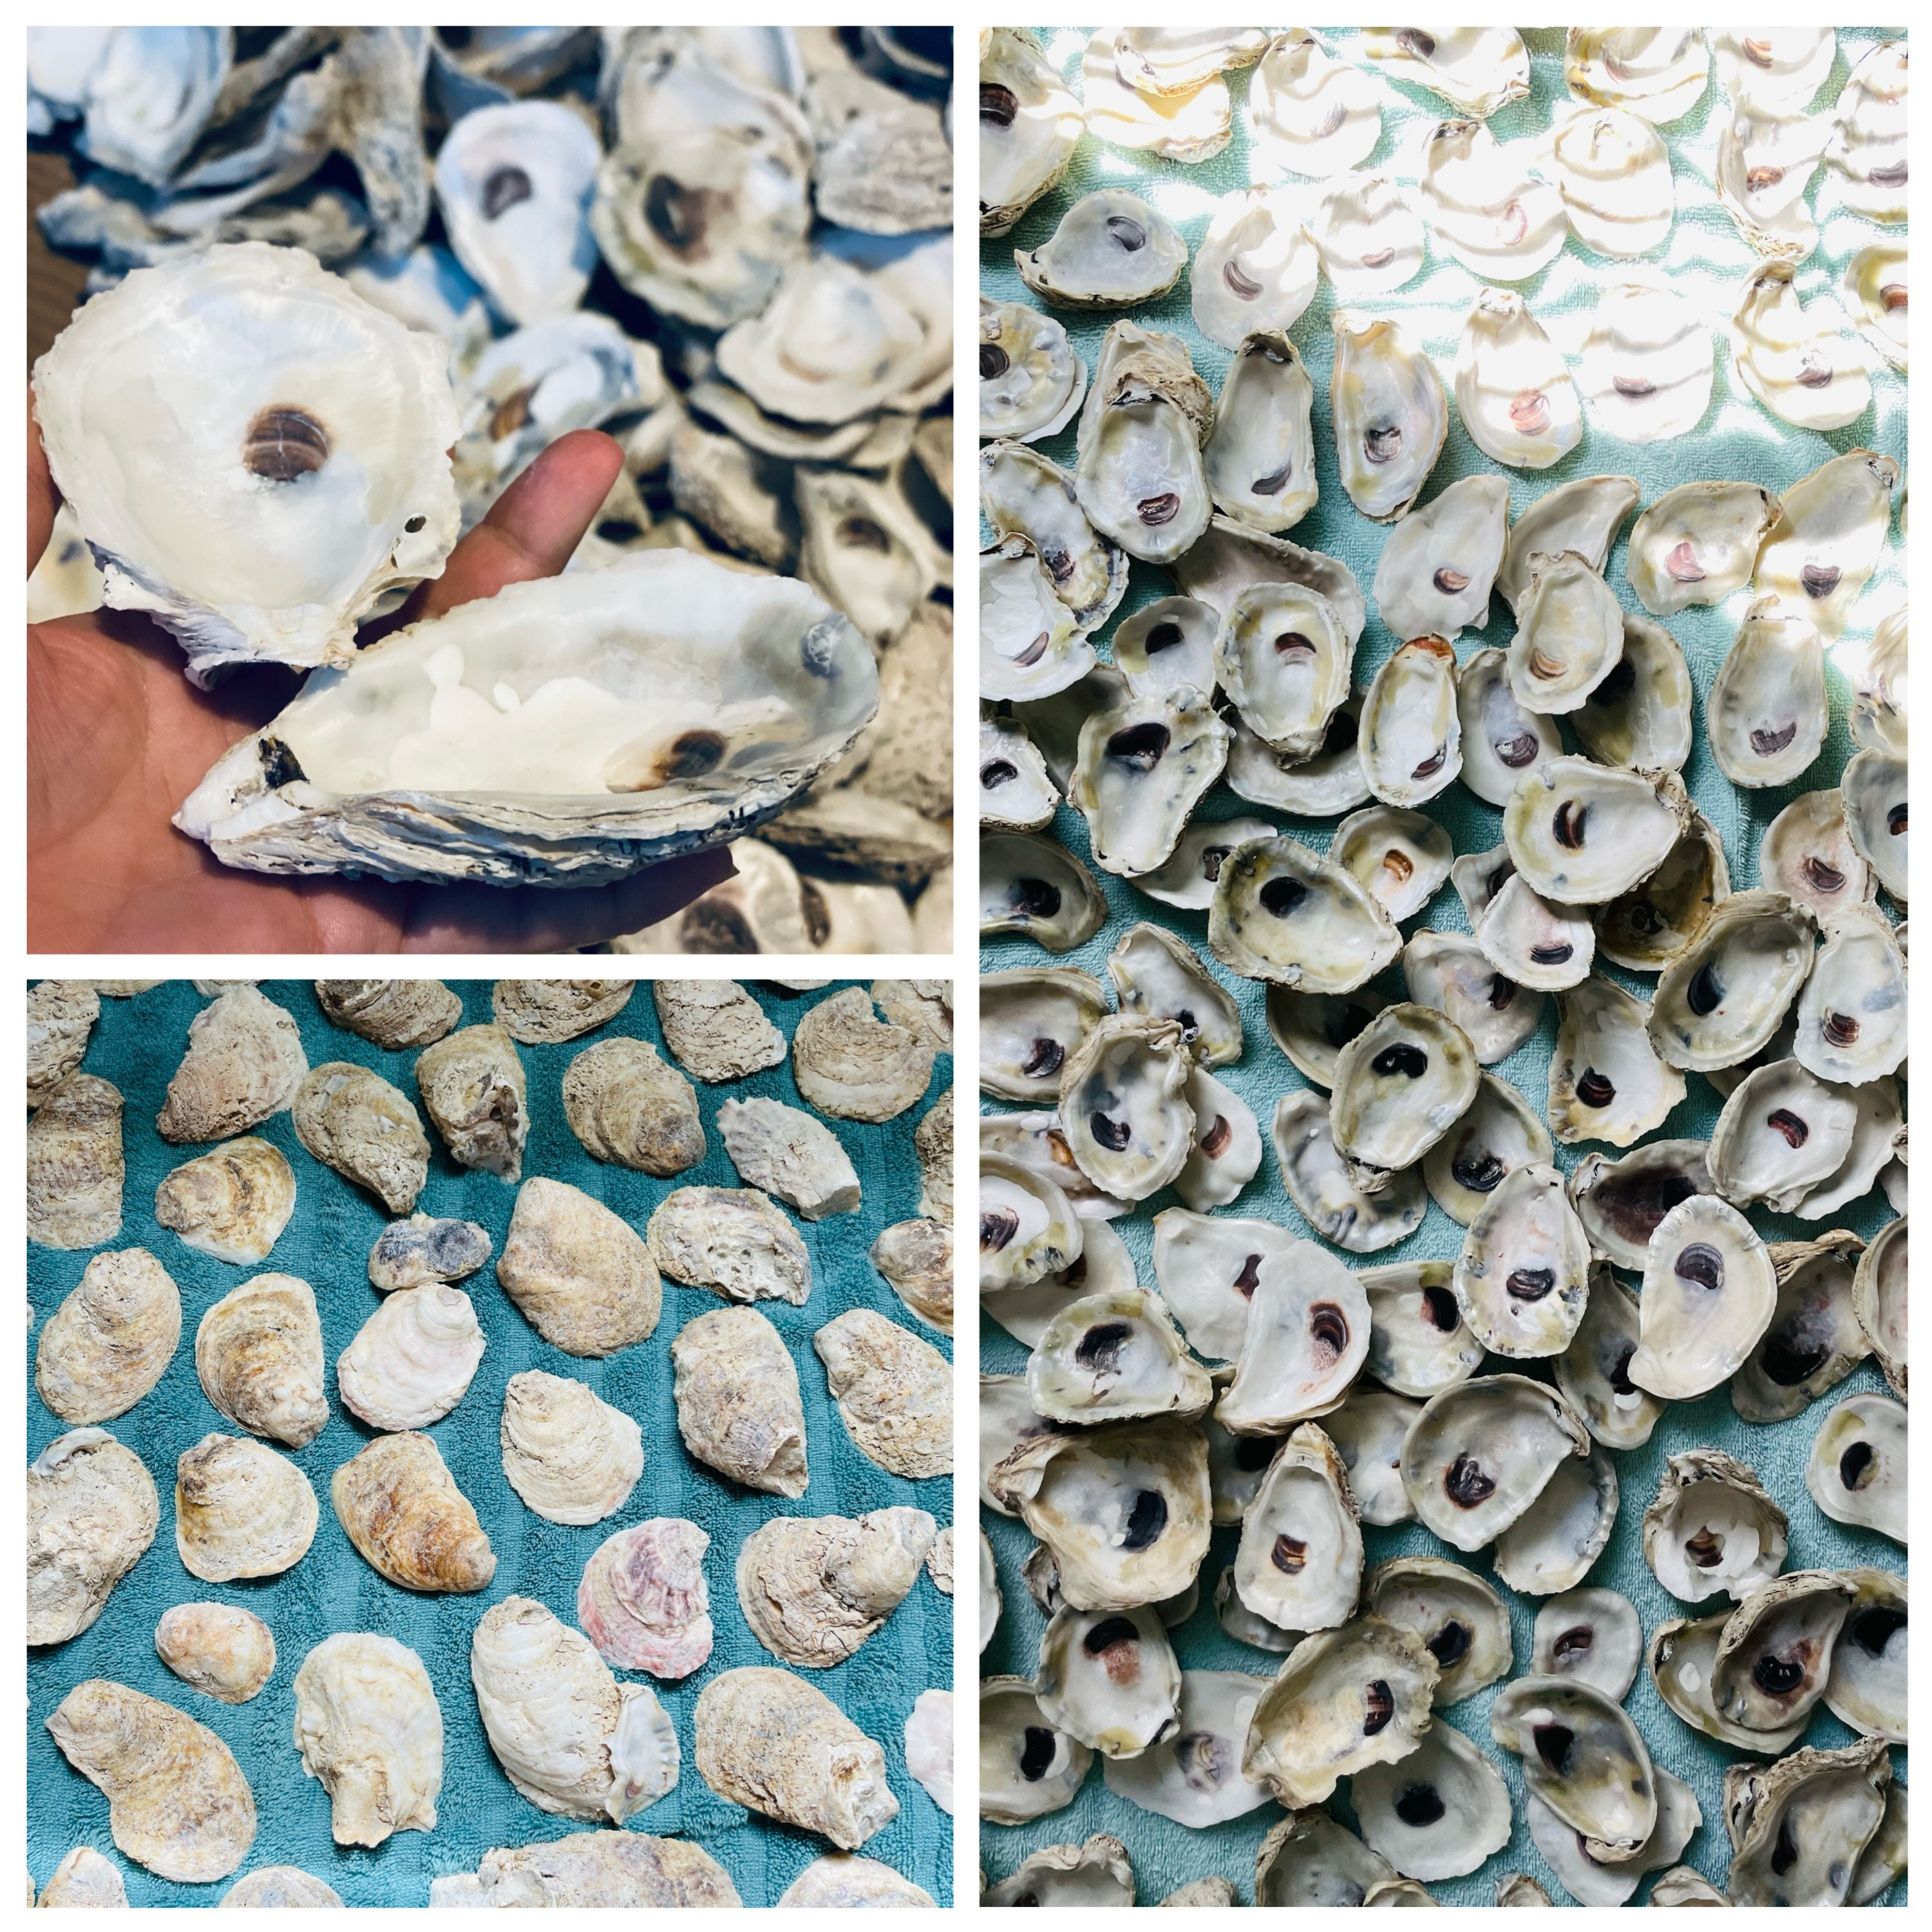 Premium Large Oyster Shells for Fun Crafts and Decor. No Holes/Cracks,  Non-Sharp, Odor Free, Round Shells . (No Sanding/Polishing/Painting) (3-  5 Length) (Assorted - 30PCS) 